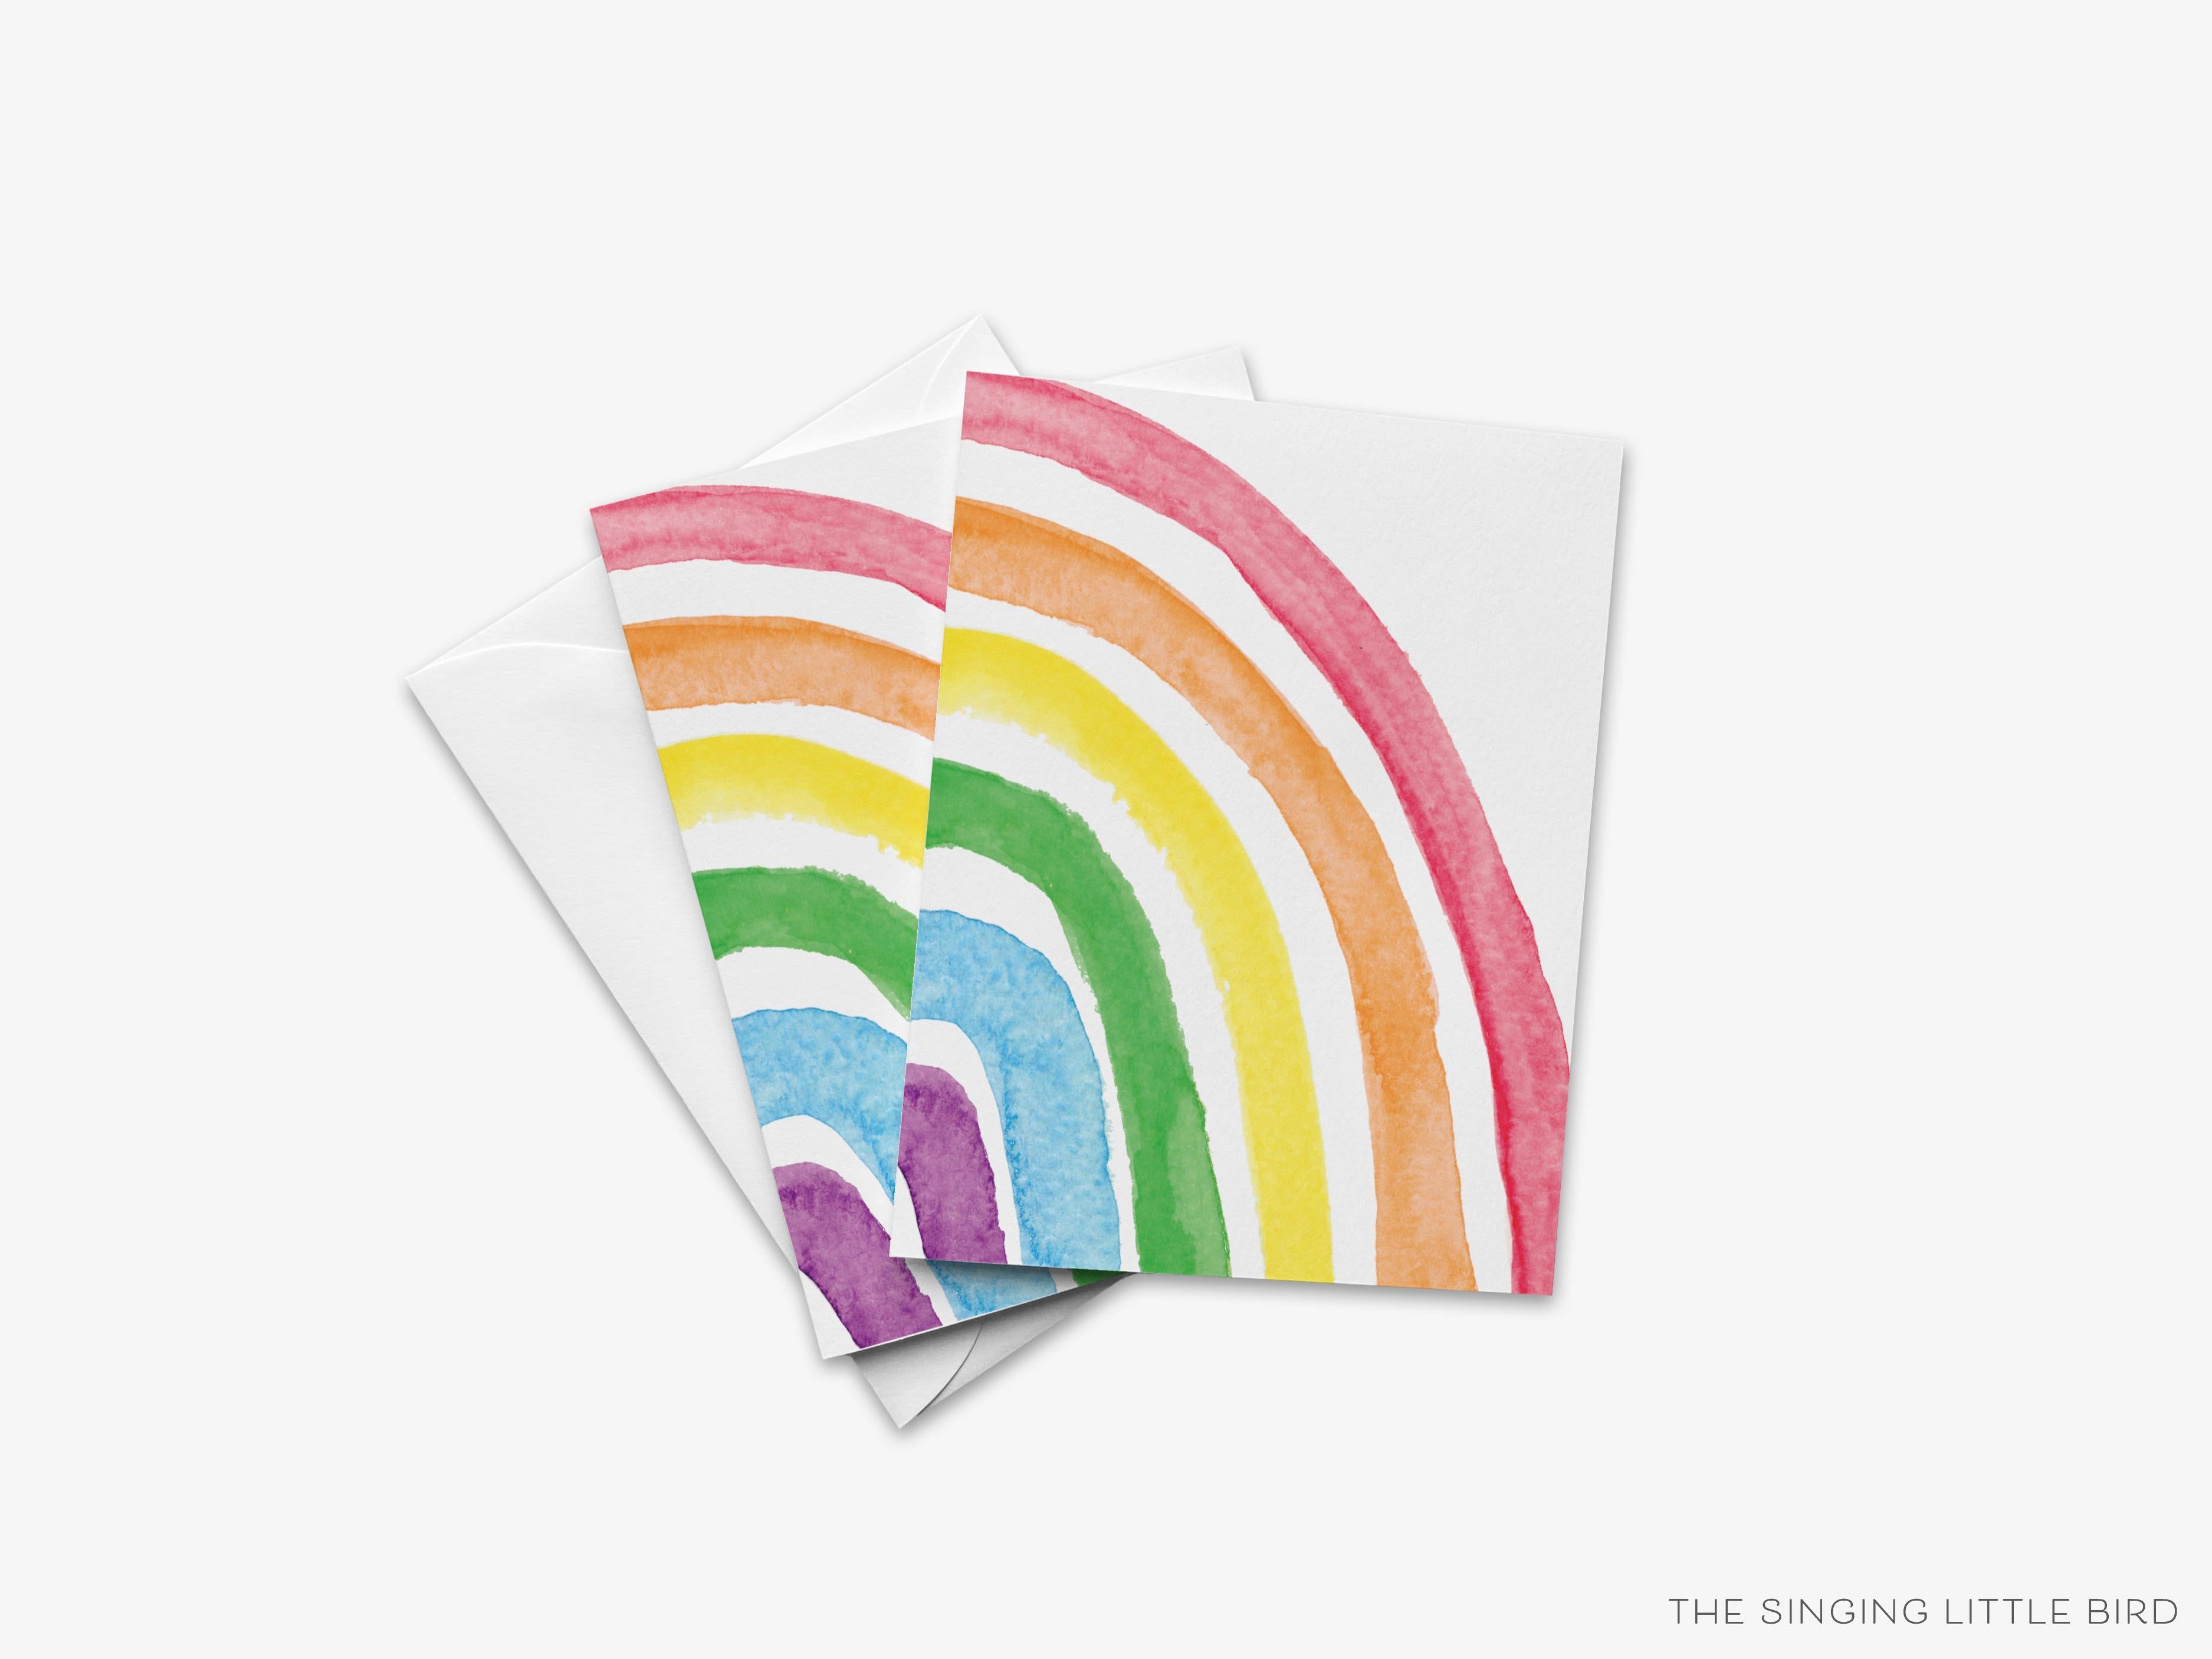 Bright Rainbow Greeting Card-These folded greeting cards are 4.25x5.5 and feature our hand-painted rainbow, printed in the USA on 100lb textured stock. They come with a White envelope and make a great thinking of you card for the colorful lover in your life.-The Singing Little Bird